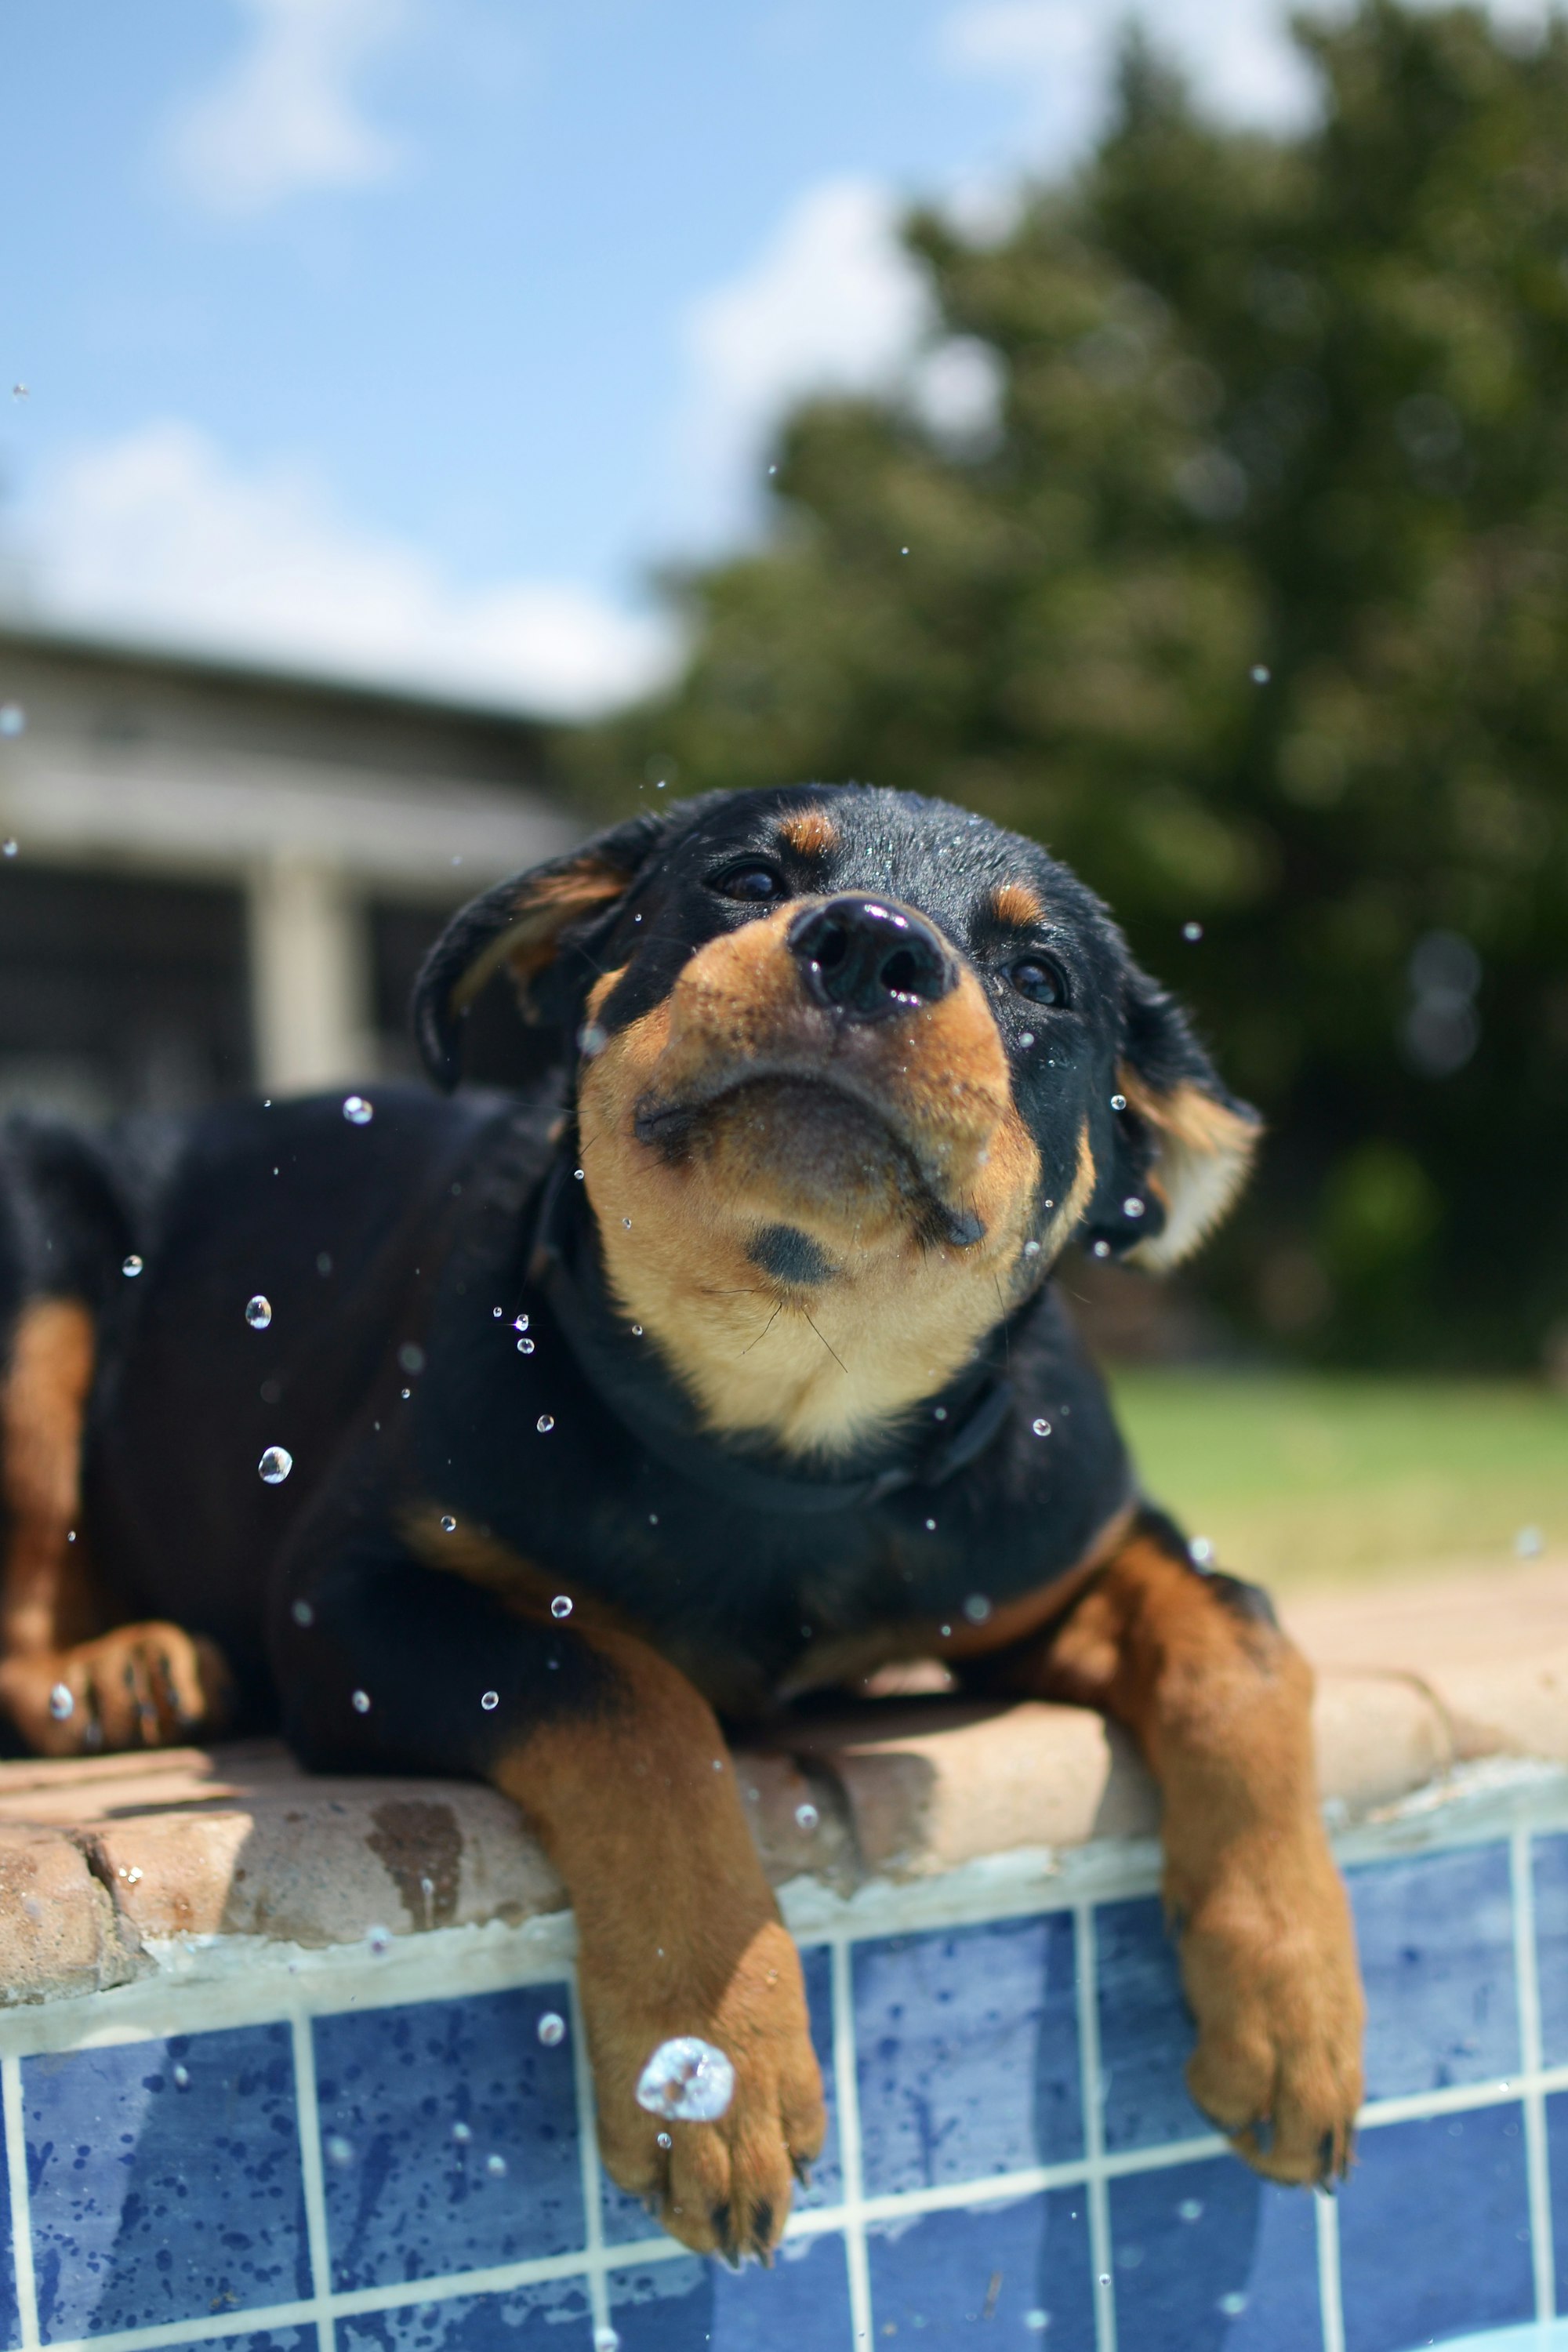 How to Cool Down a Dog?